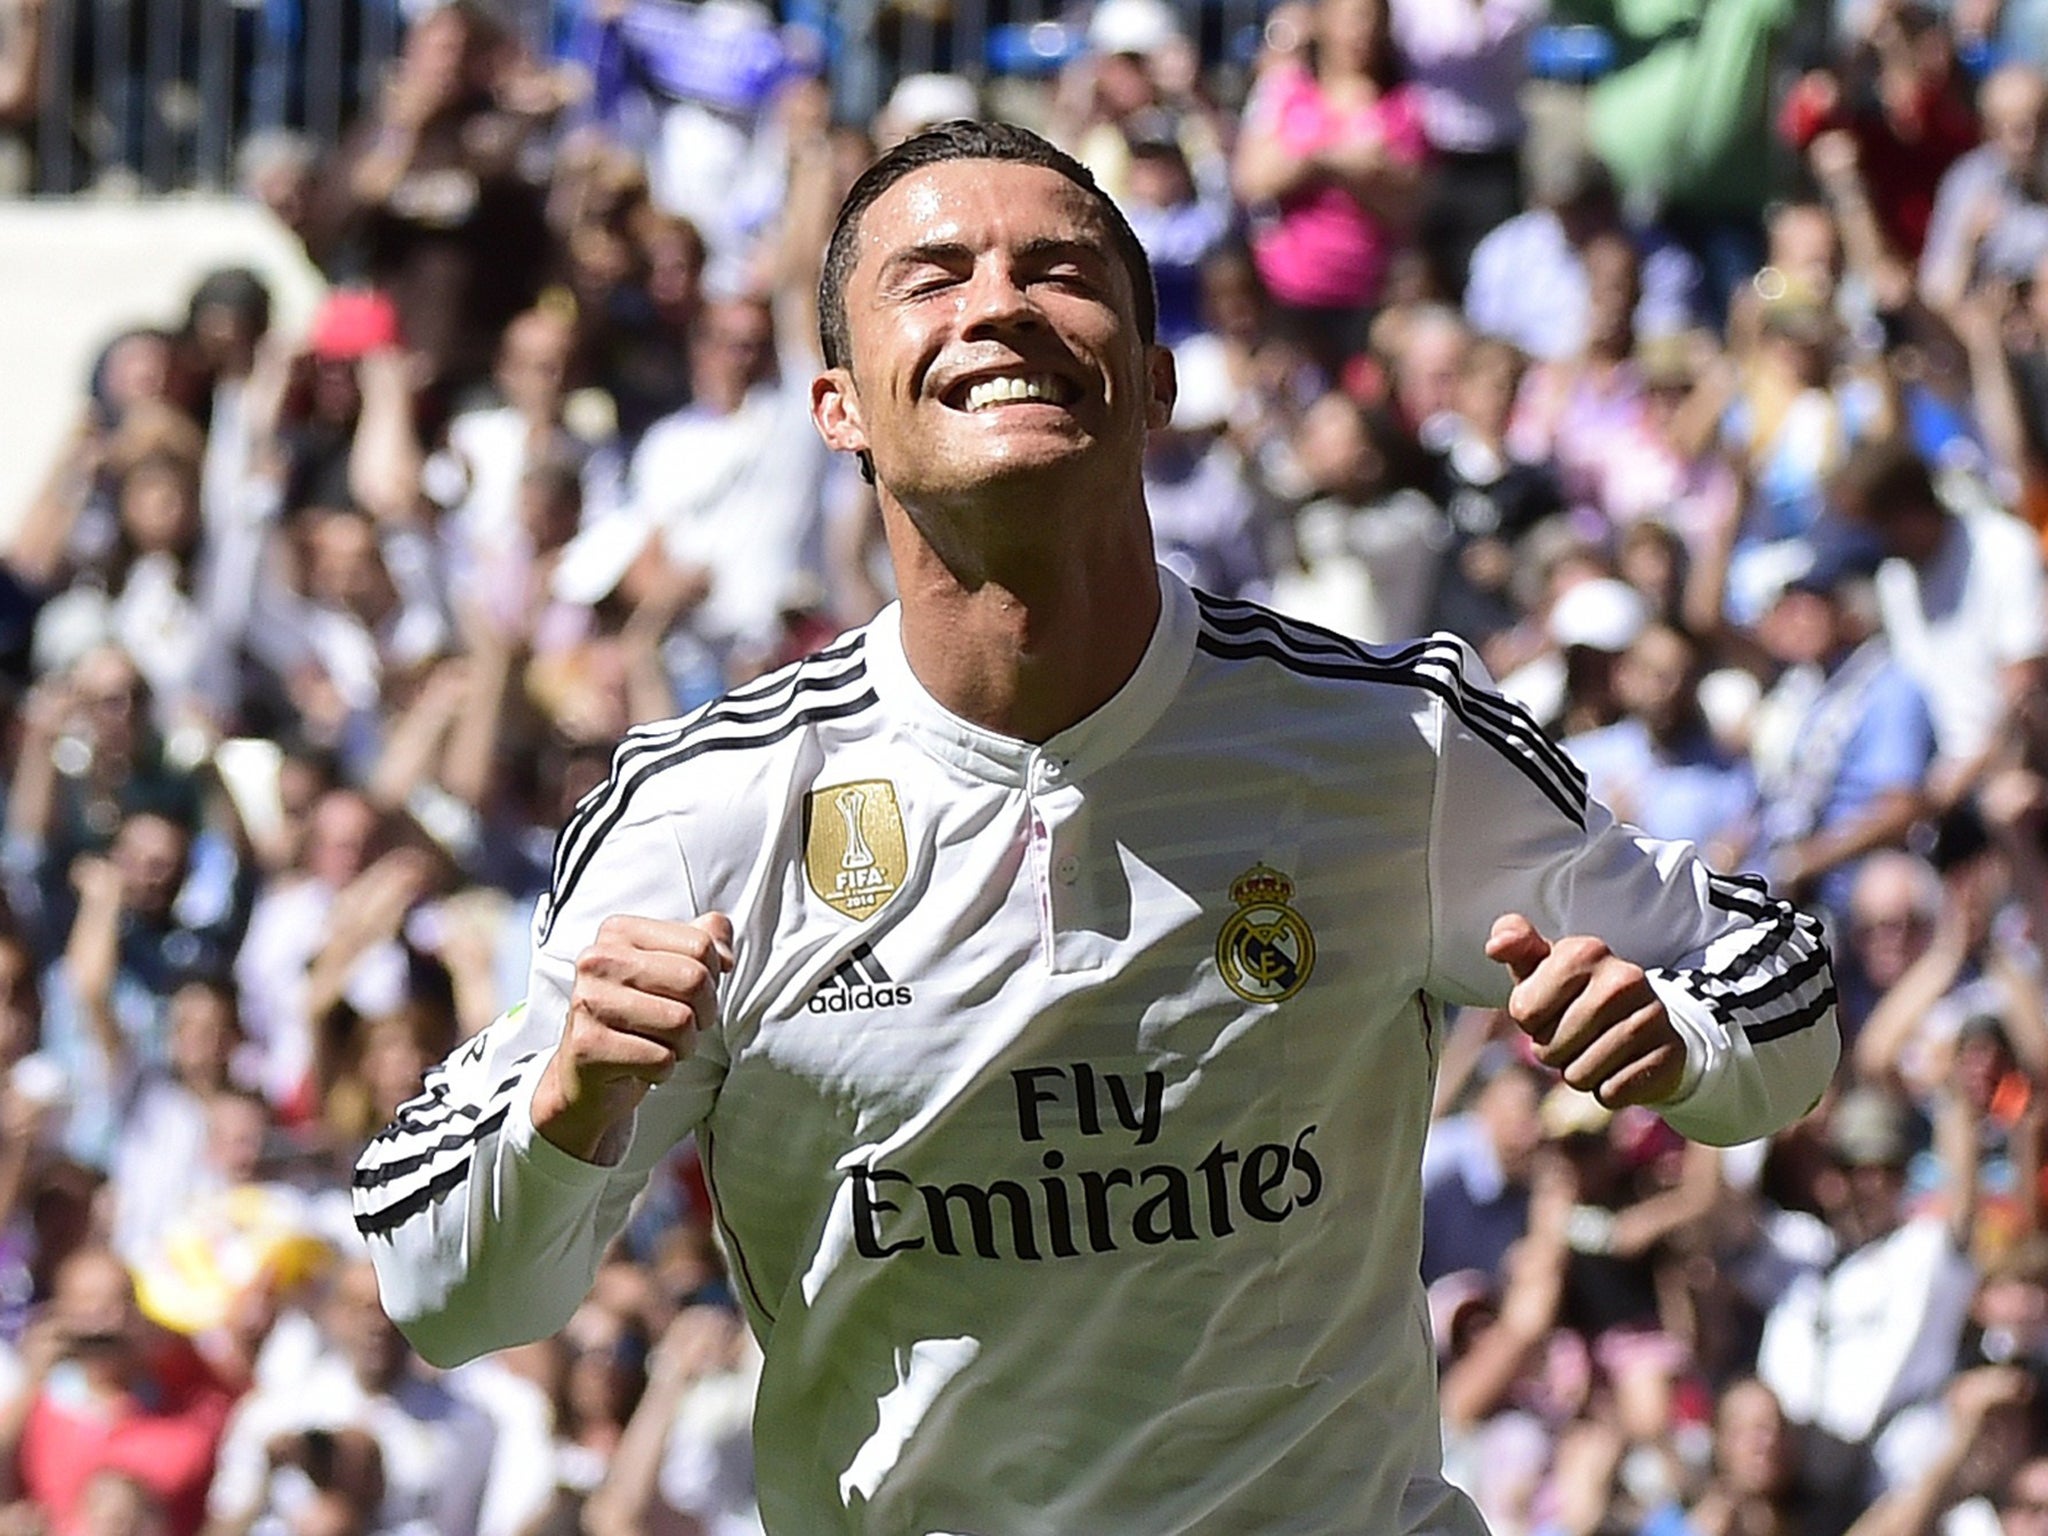 Cristiano Ronaldo has scored six goals in his last two matches for Real Madrid